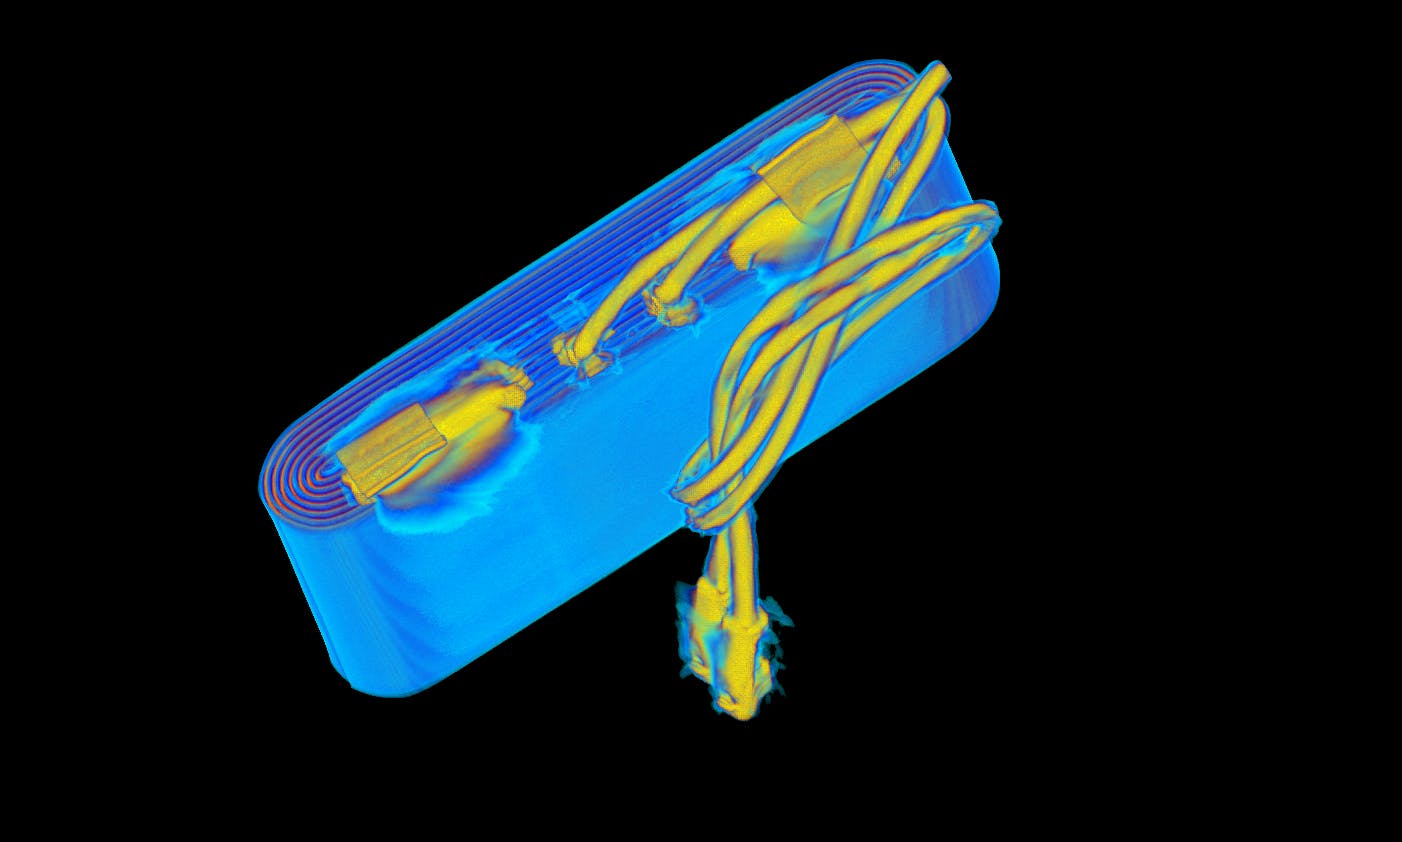 Lumafield industrial CT scan 3D view of lithium-ion pouch or prismatic cell